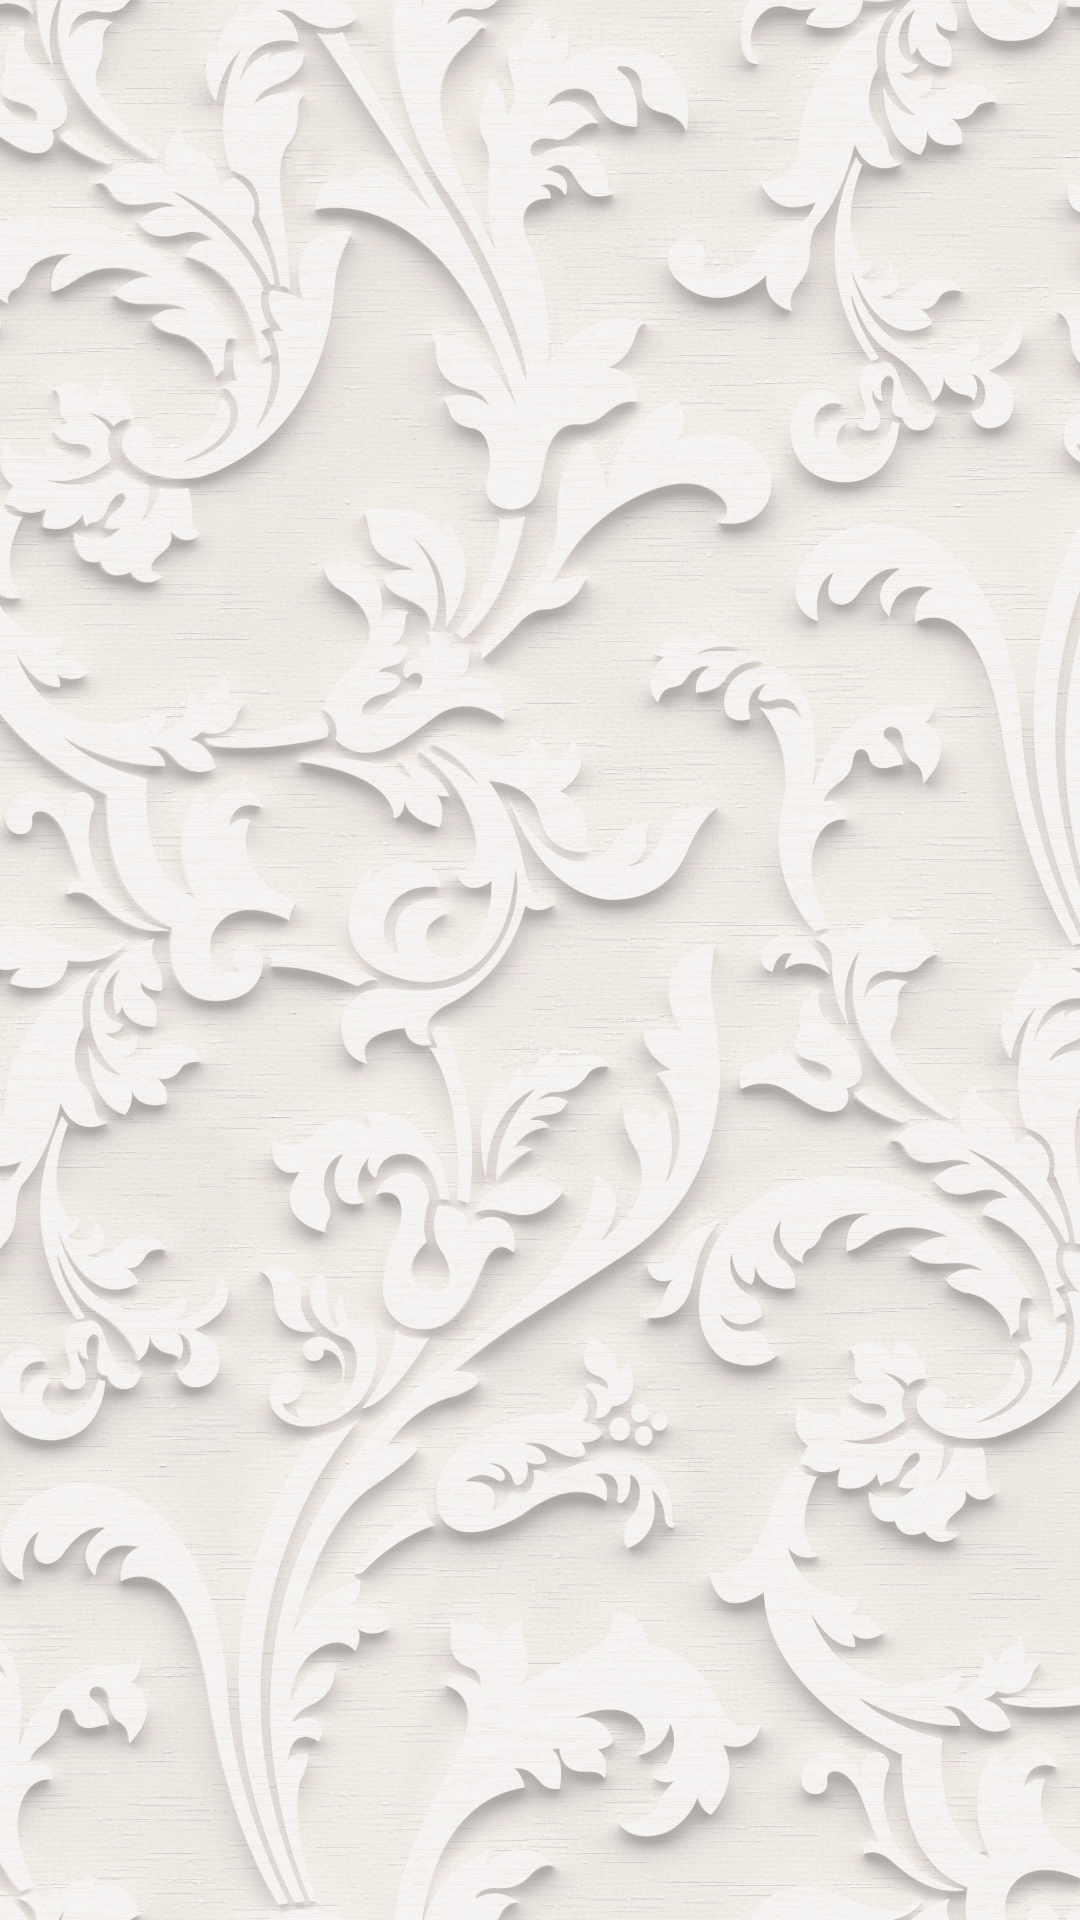 White and Gray Floral Textile. Wallpaper in 1080x1920 Resolution